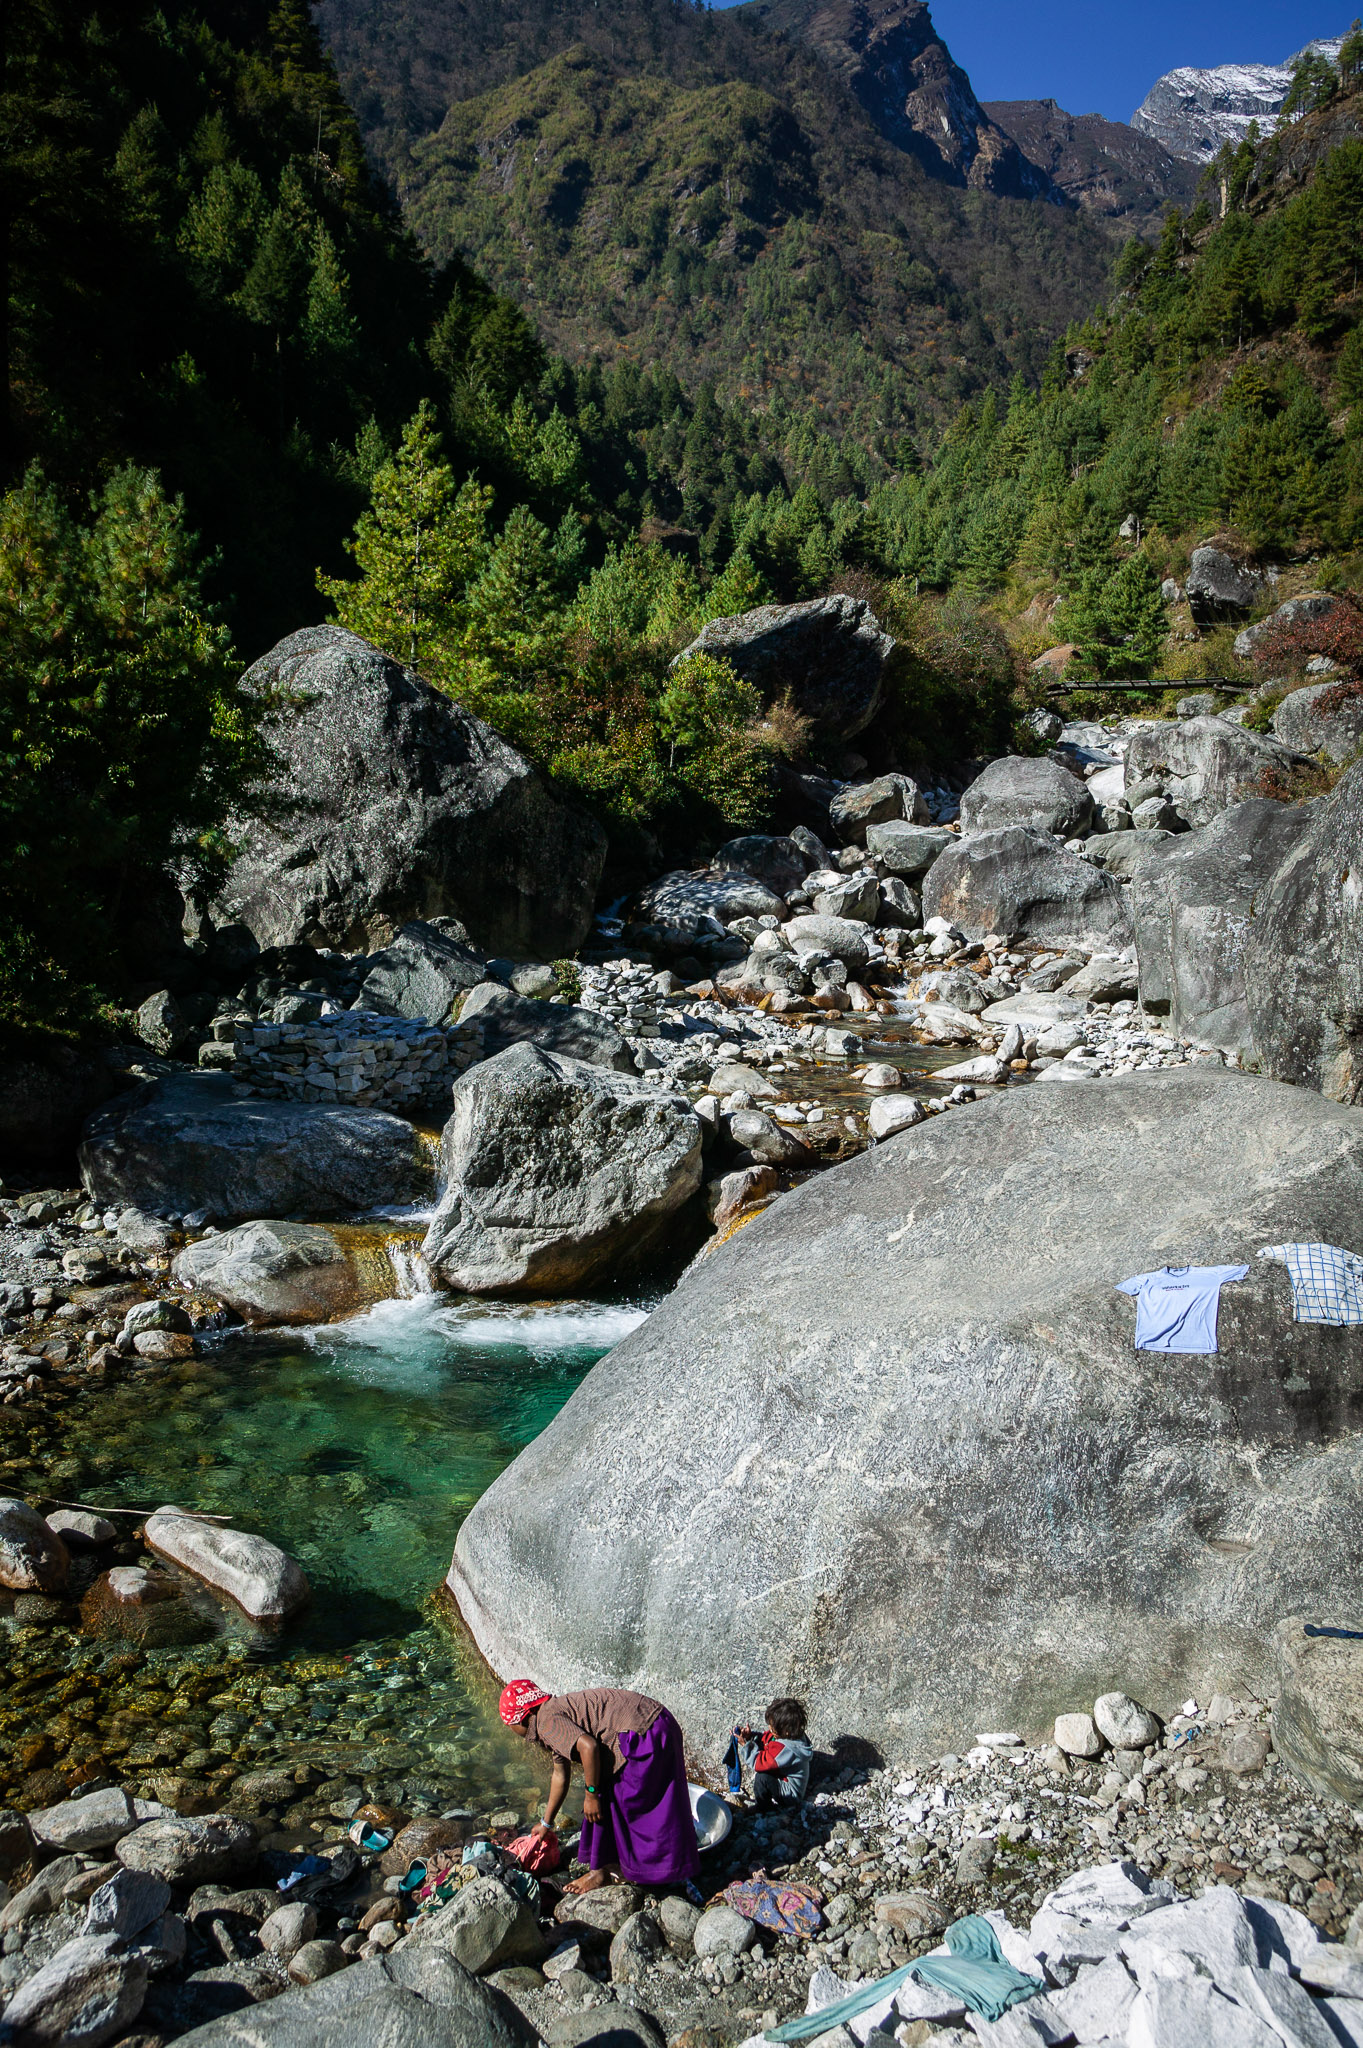 Passing laundry on way to Lukla